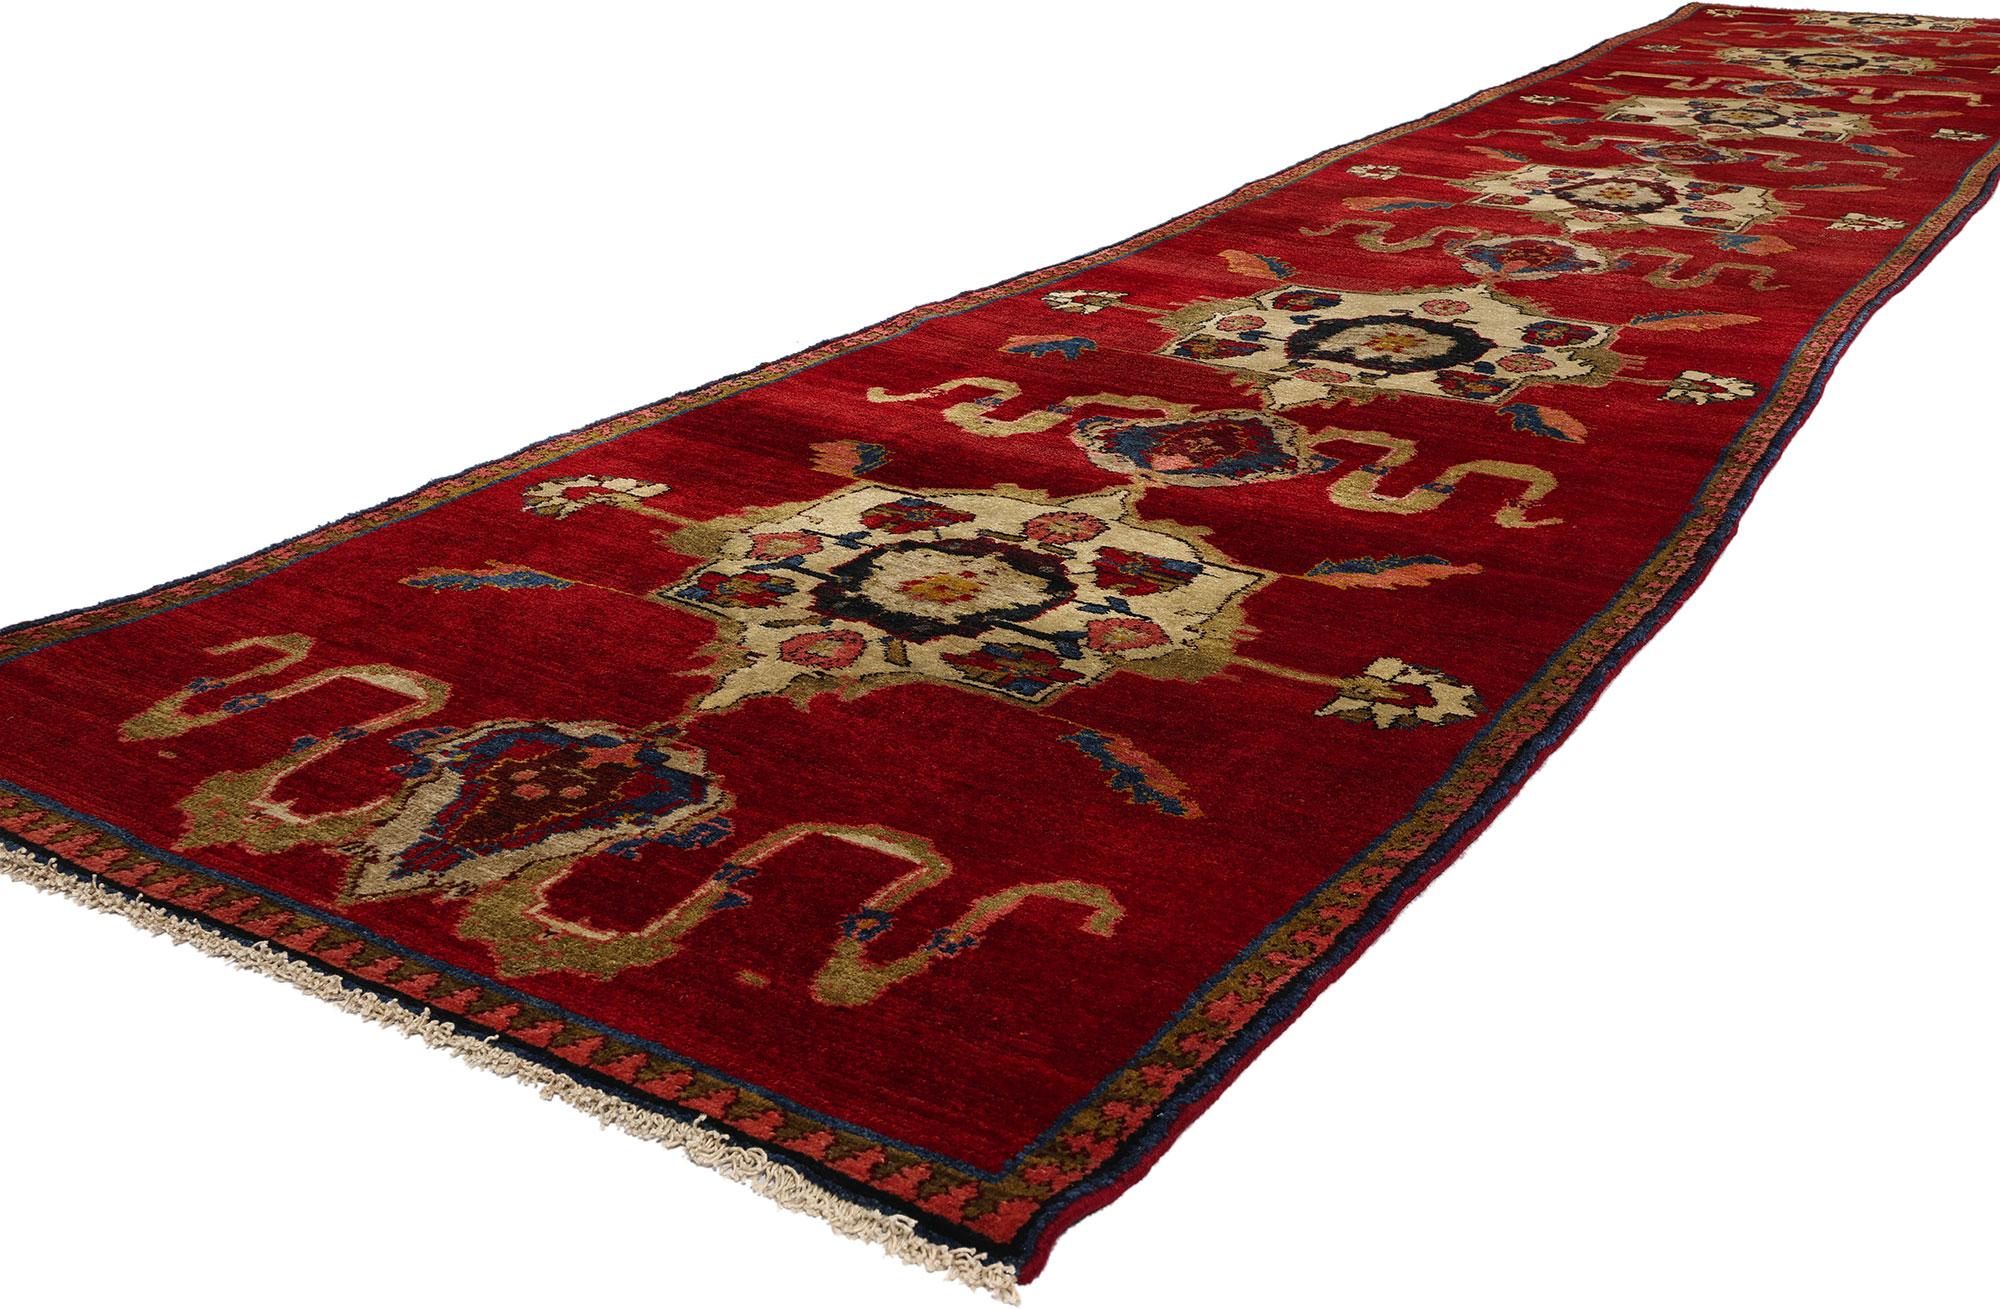 53870 Vintage Red Turkish Oushak Rug Runner, 03'01 x 17'03. Turkish Oushak carpet runners are long, narrow rugs woven in the Oushak region of Western Turkey. These runners typically feature the characteristic designs and weaving techniques of Oushak